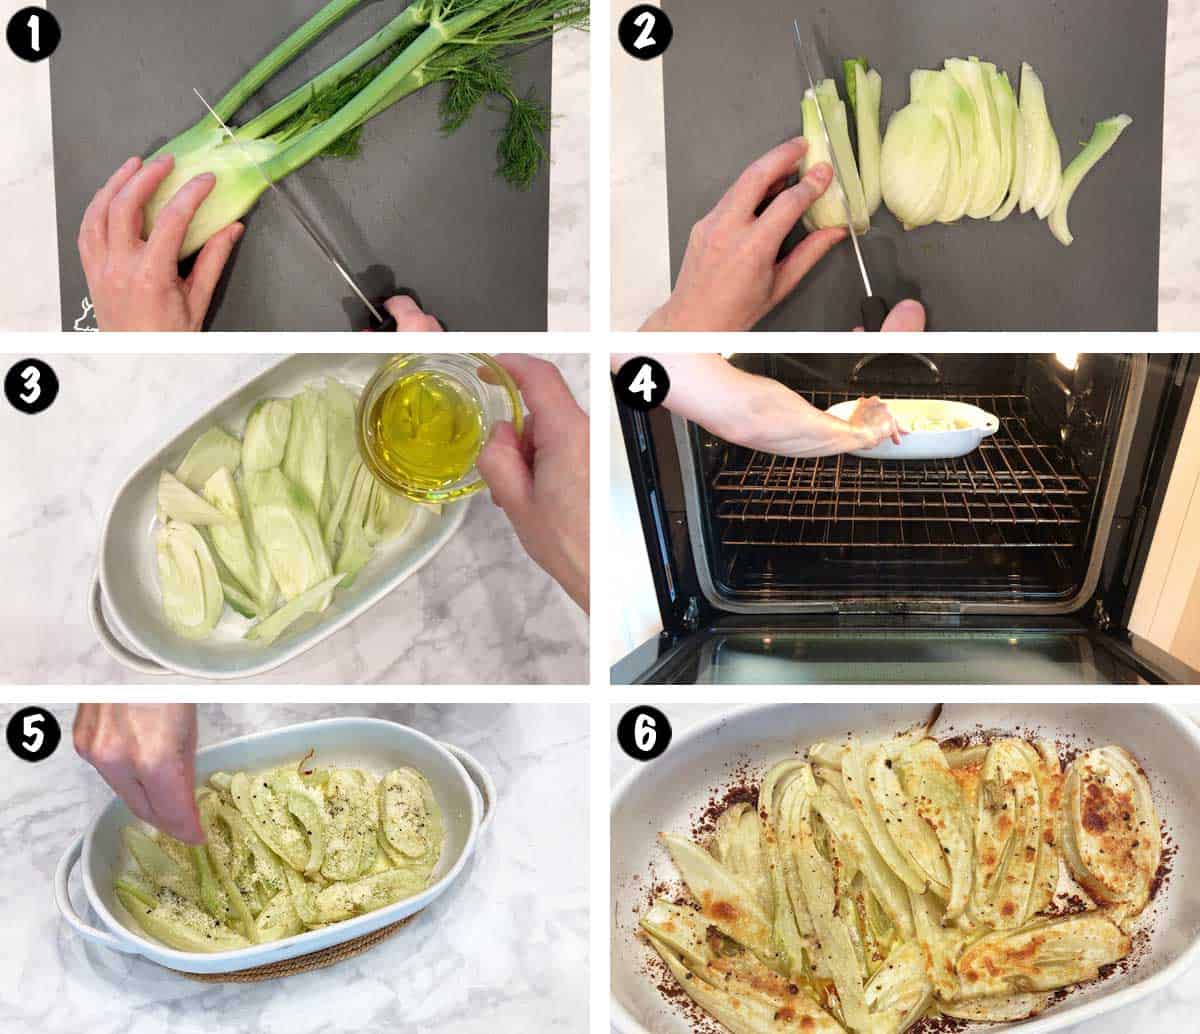 A 6-photo collage showing the steps for cooking fennel in the oven. 